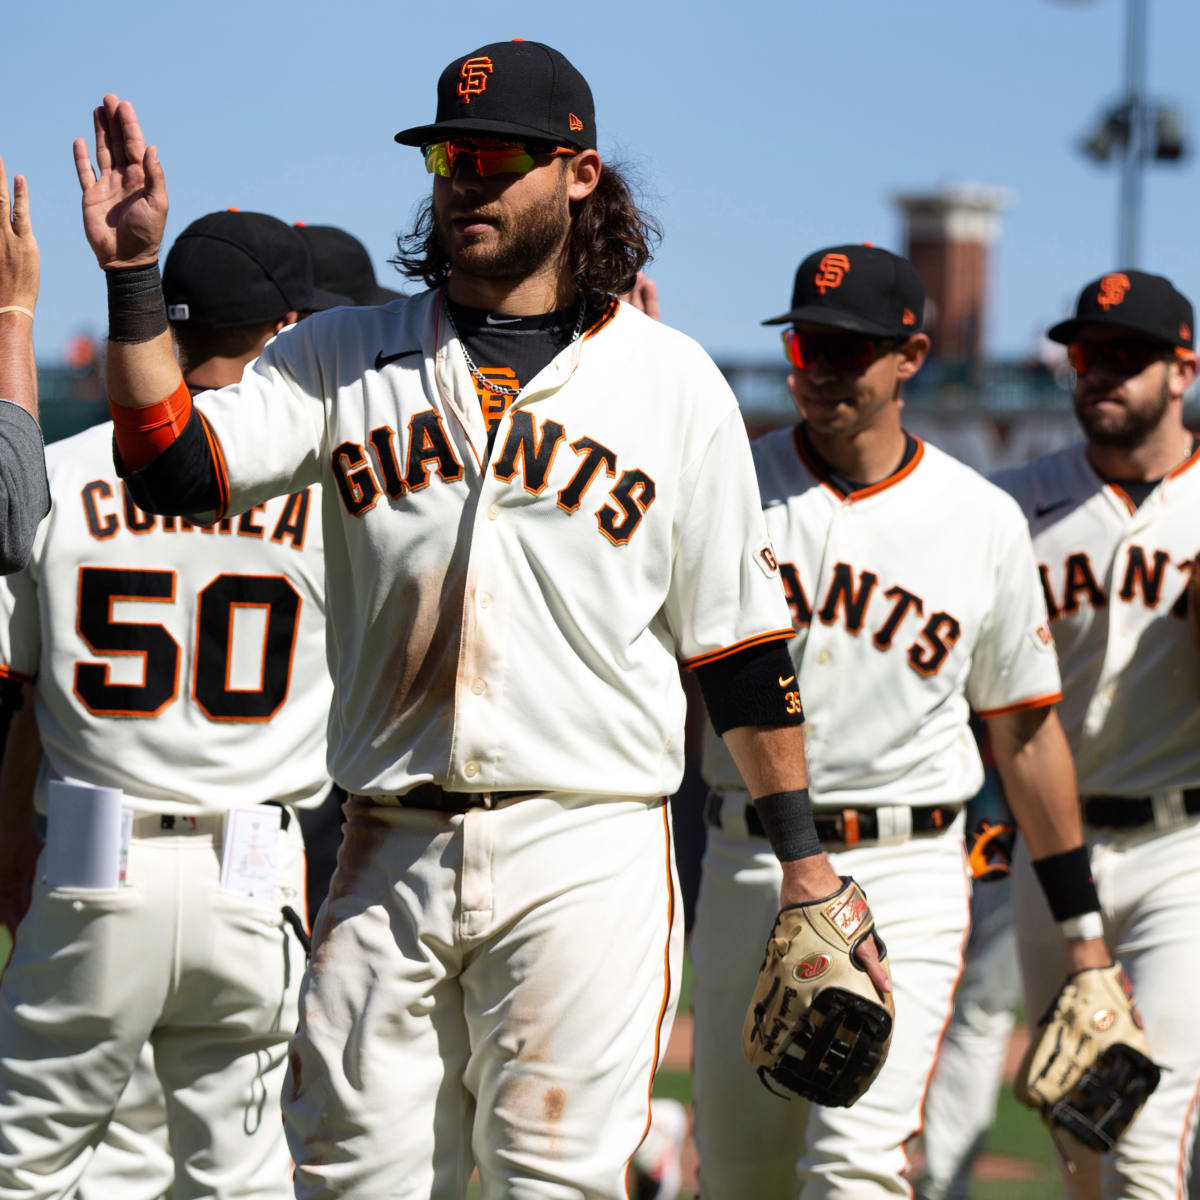 B/R Walk-Off on X: Giants are first MLB team to wear on-field